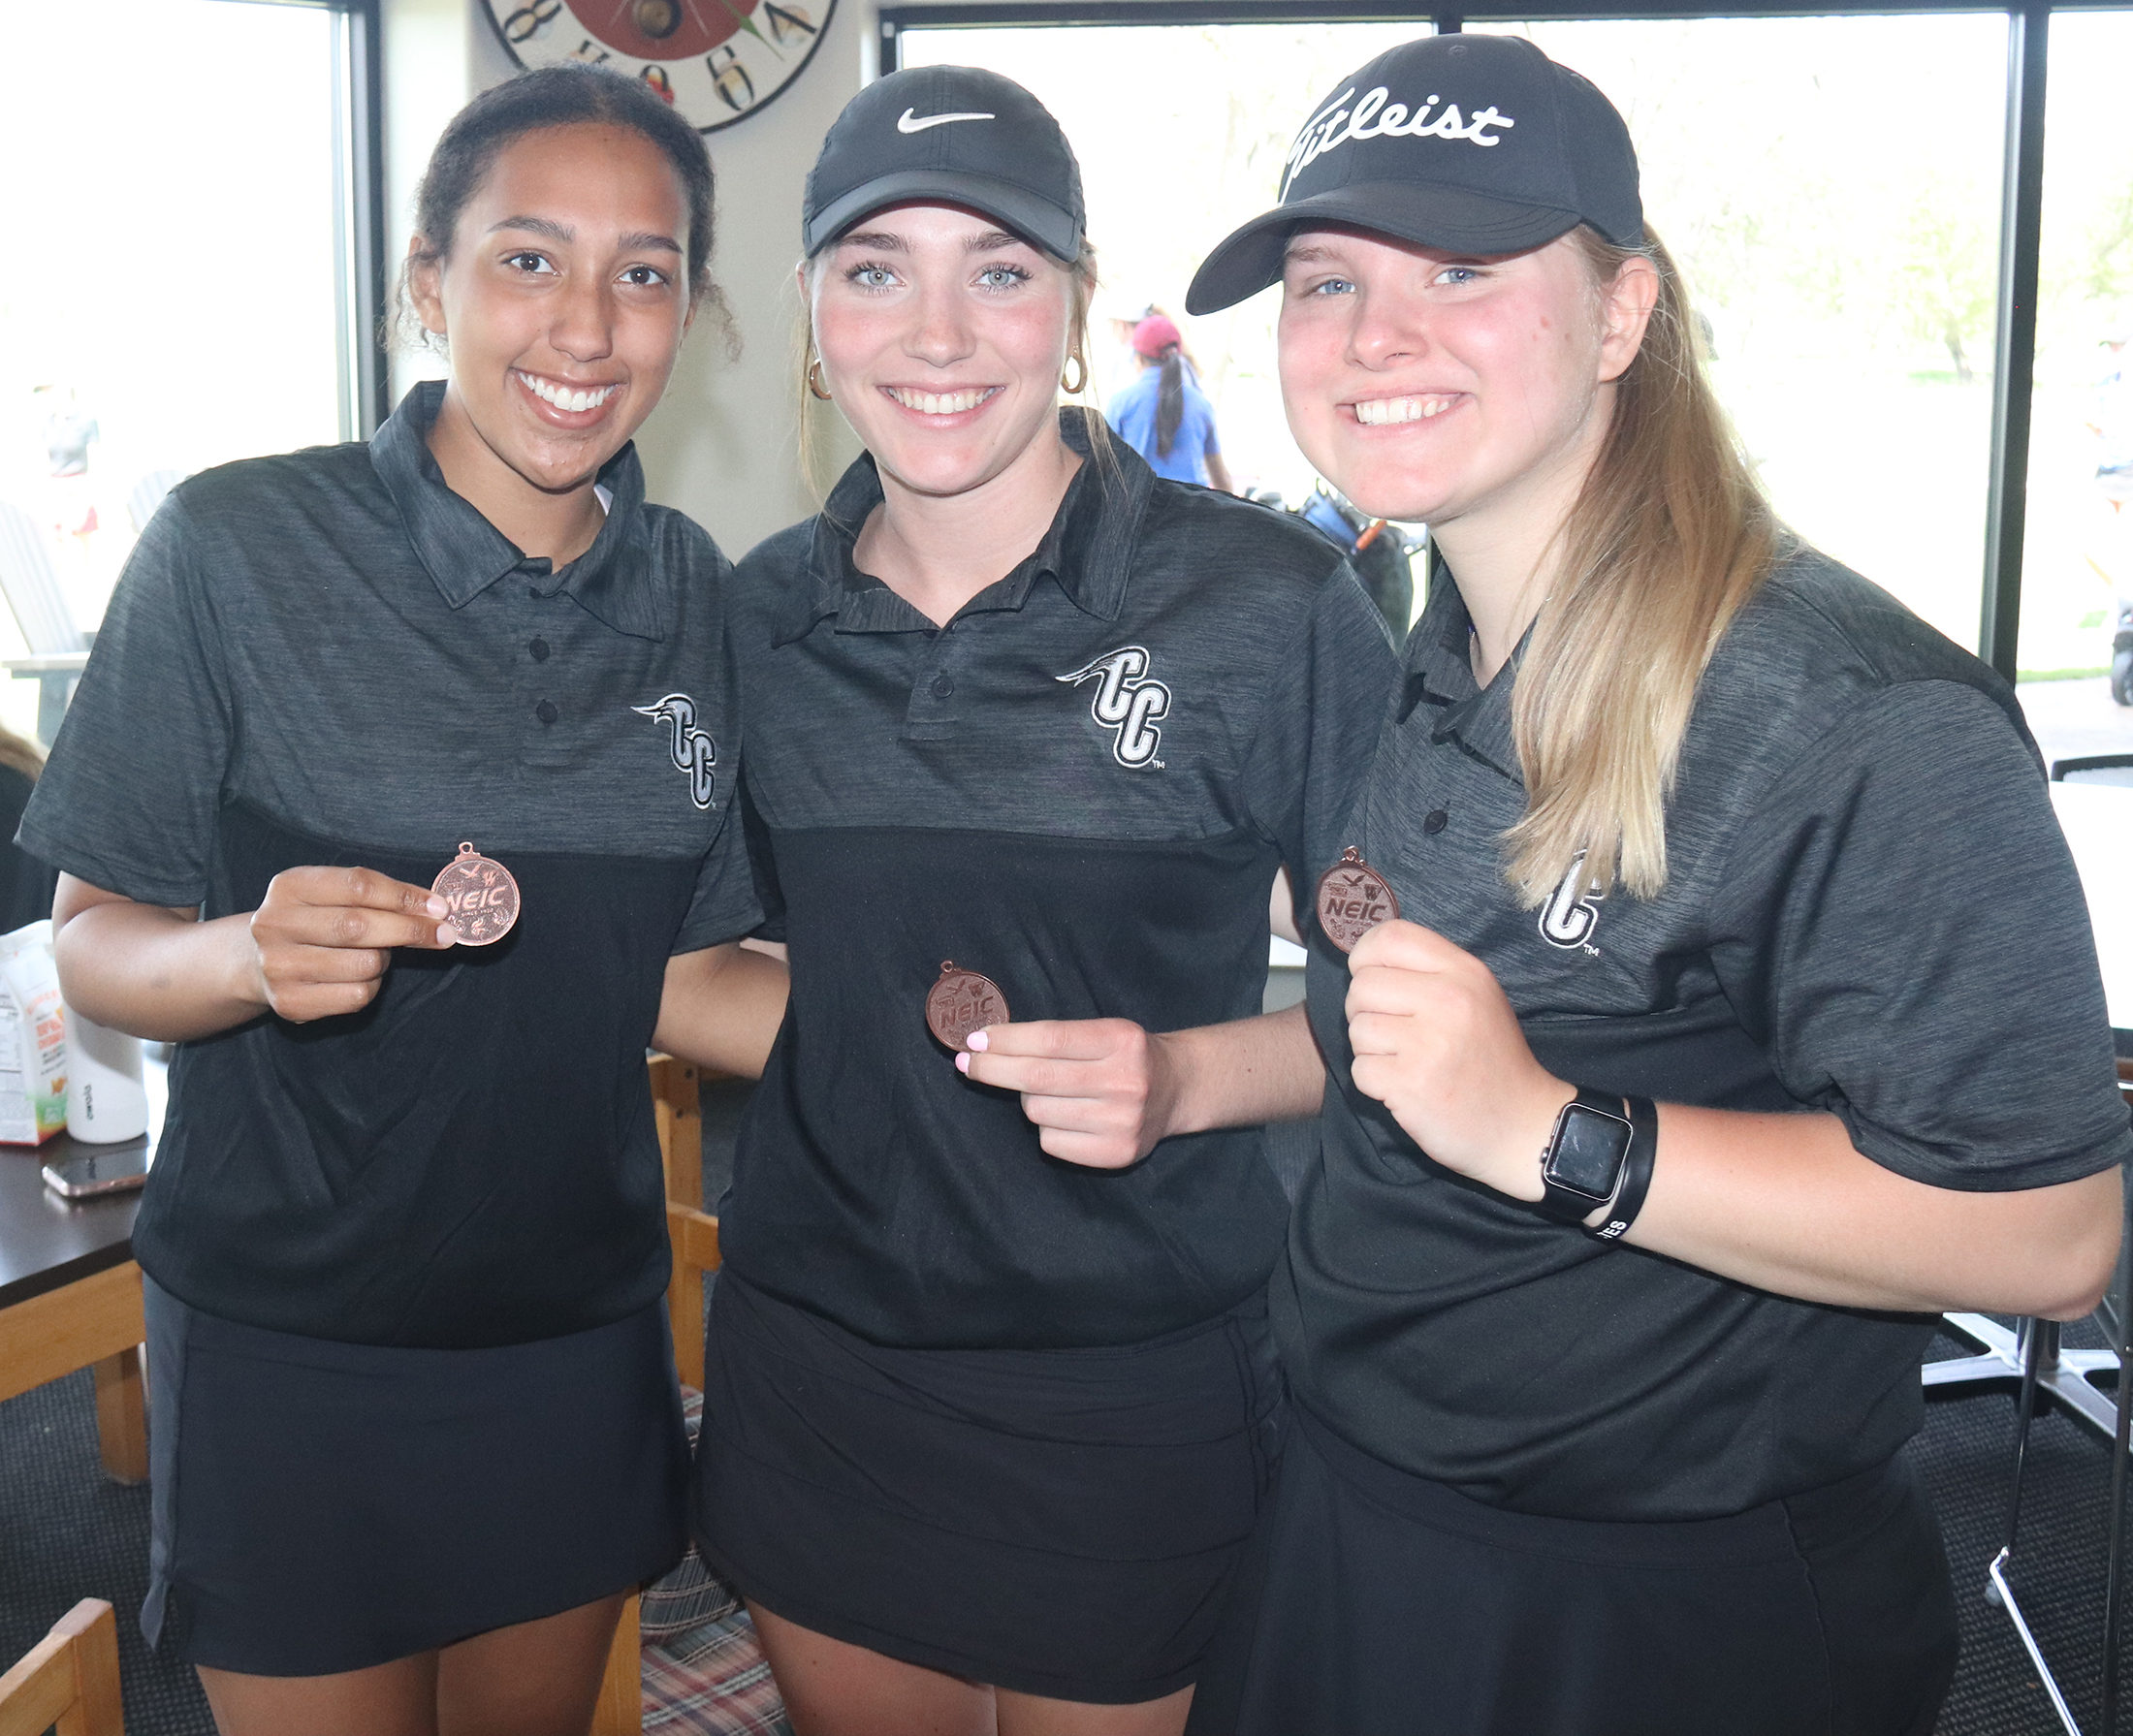 Carson Gallup shoots career low 18-hole score for NEIC medalist honors; Comet girls Effle, Wohlers and Rimrod All-NEIC